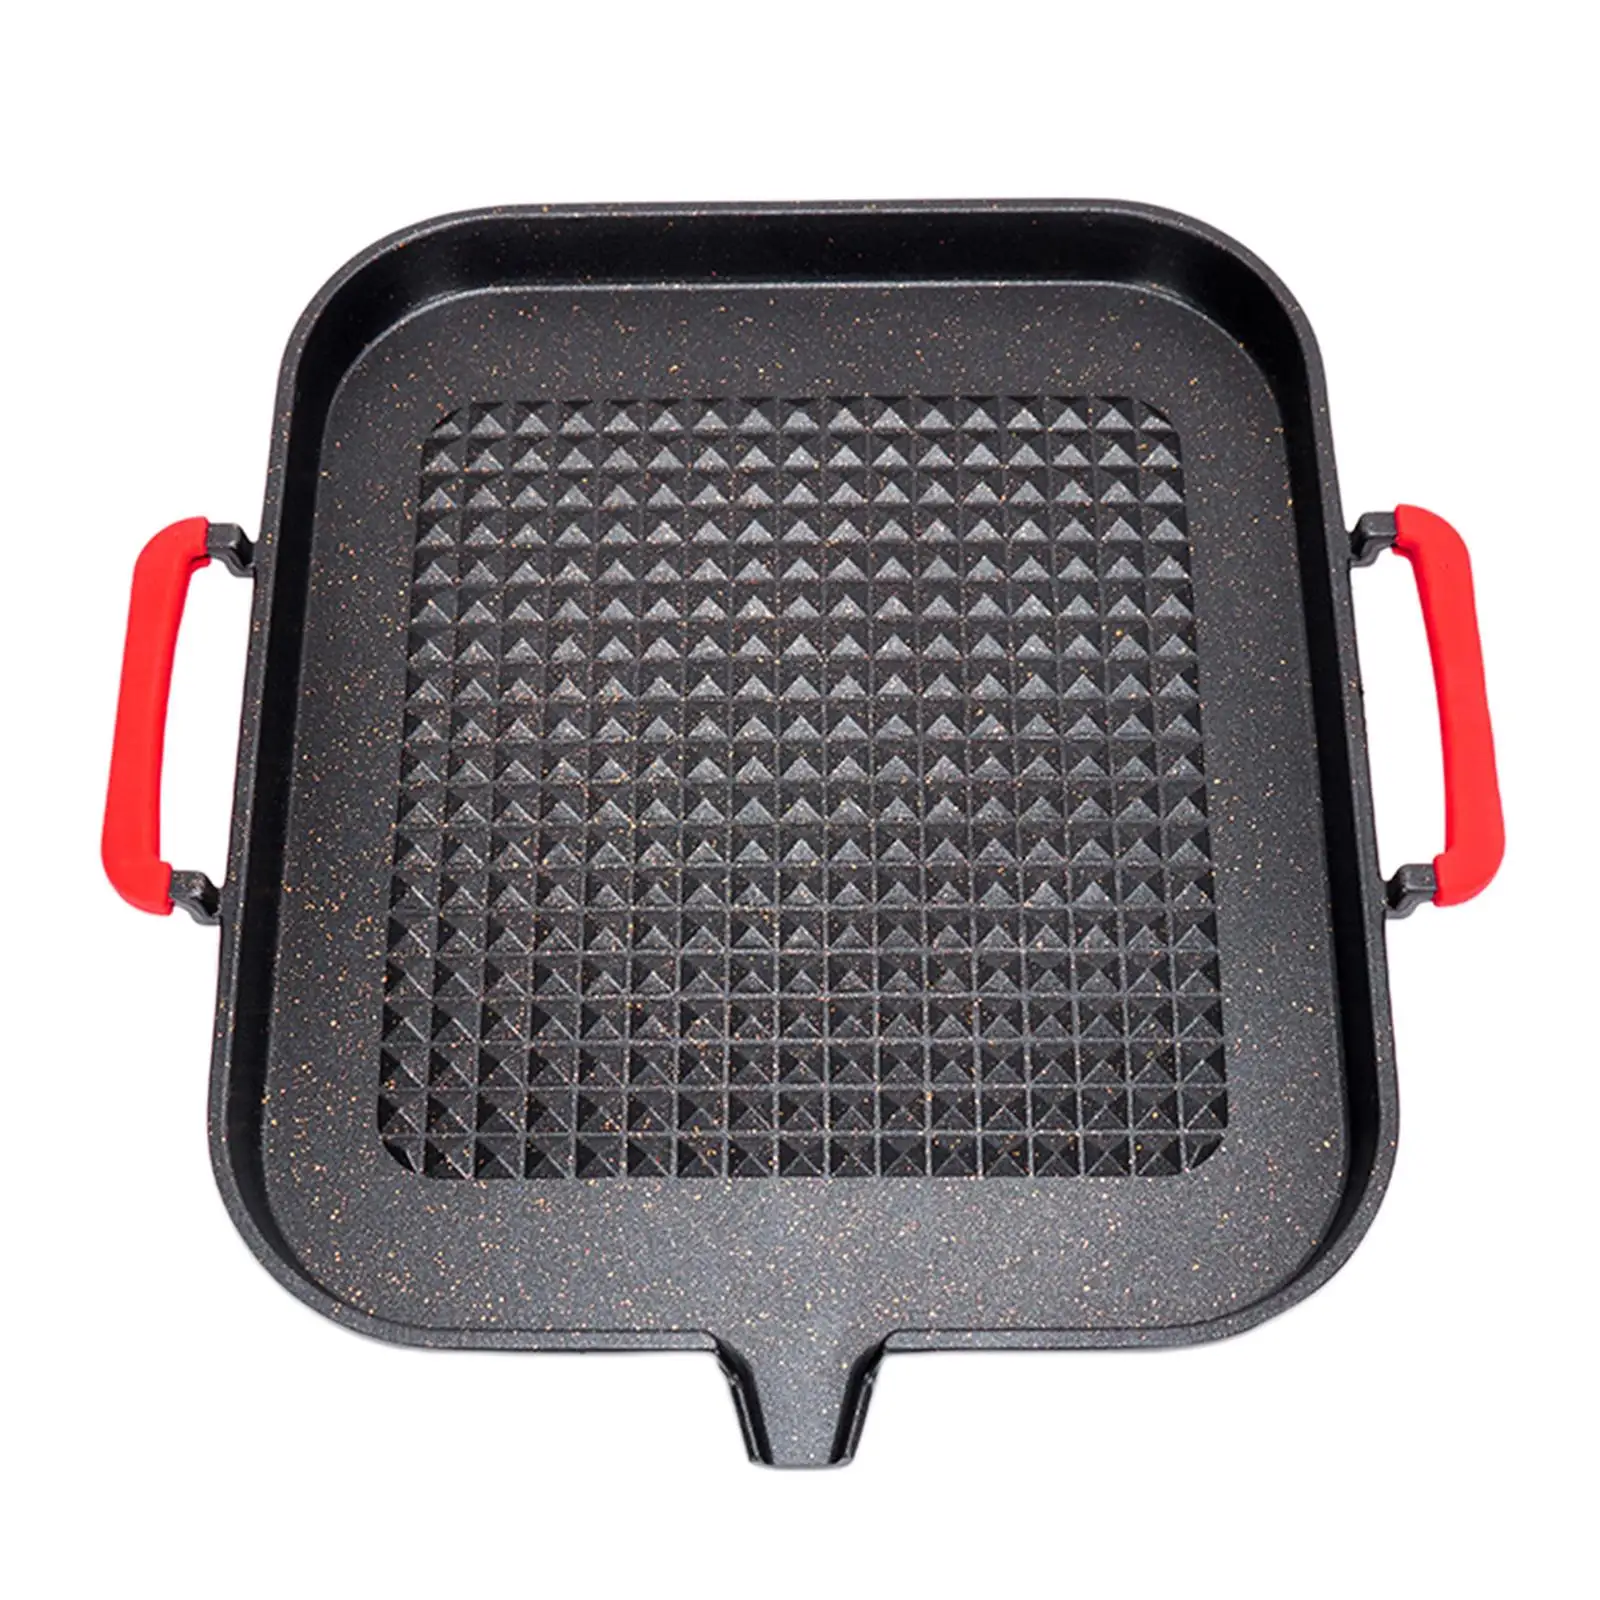 Premium Cook Non-Stick Grill Pan, Cast Aluminium Non Stick Frying Pan with Safety Handle for Outdoor, Camping, BBQ, Picnic